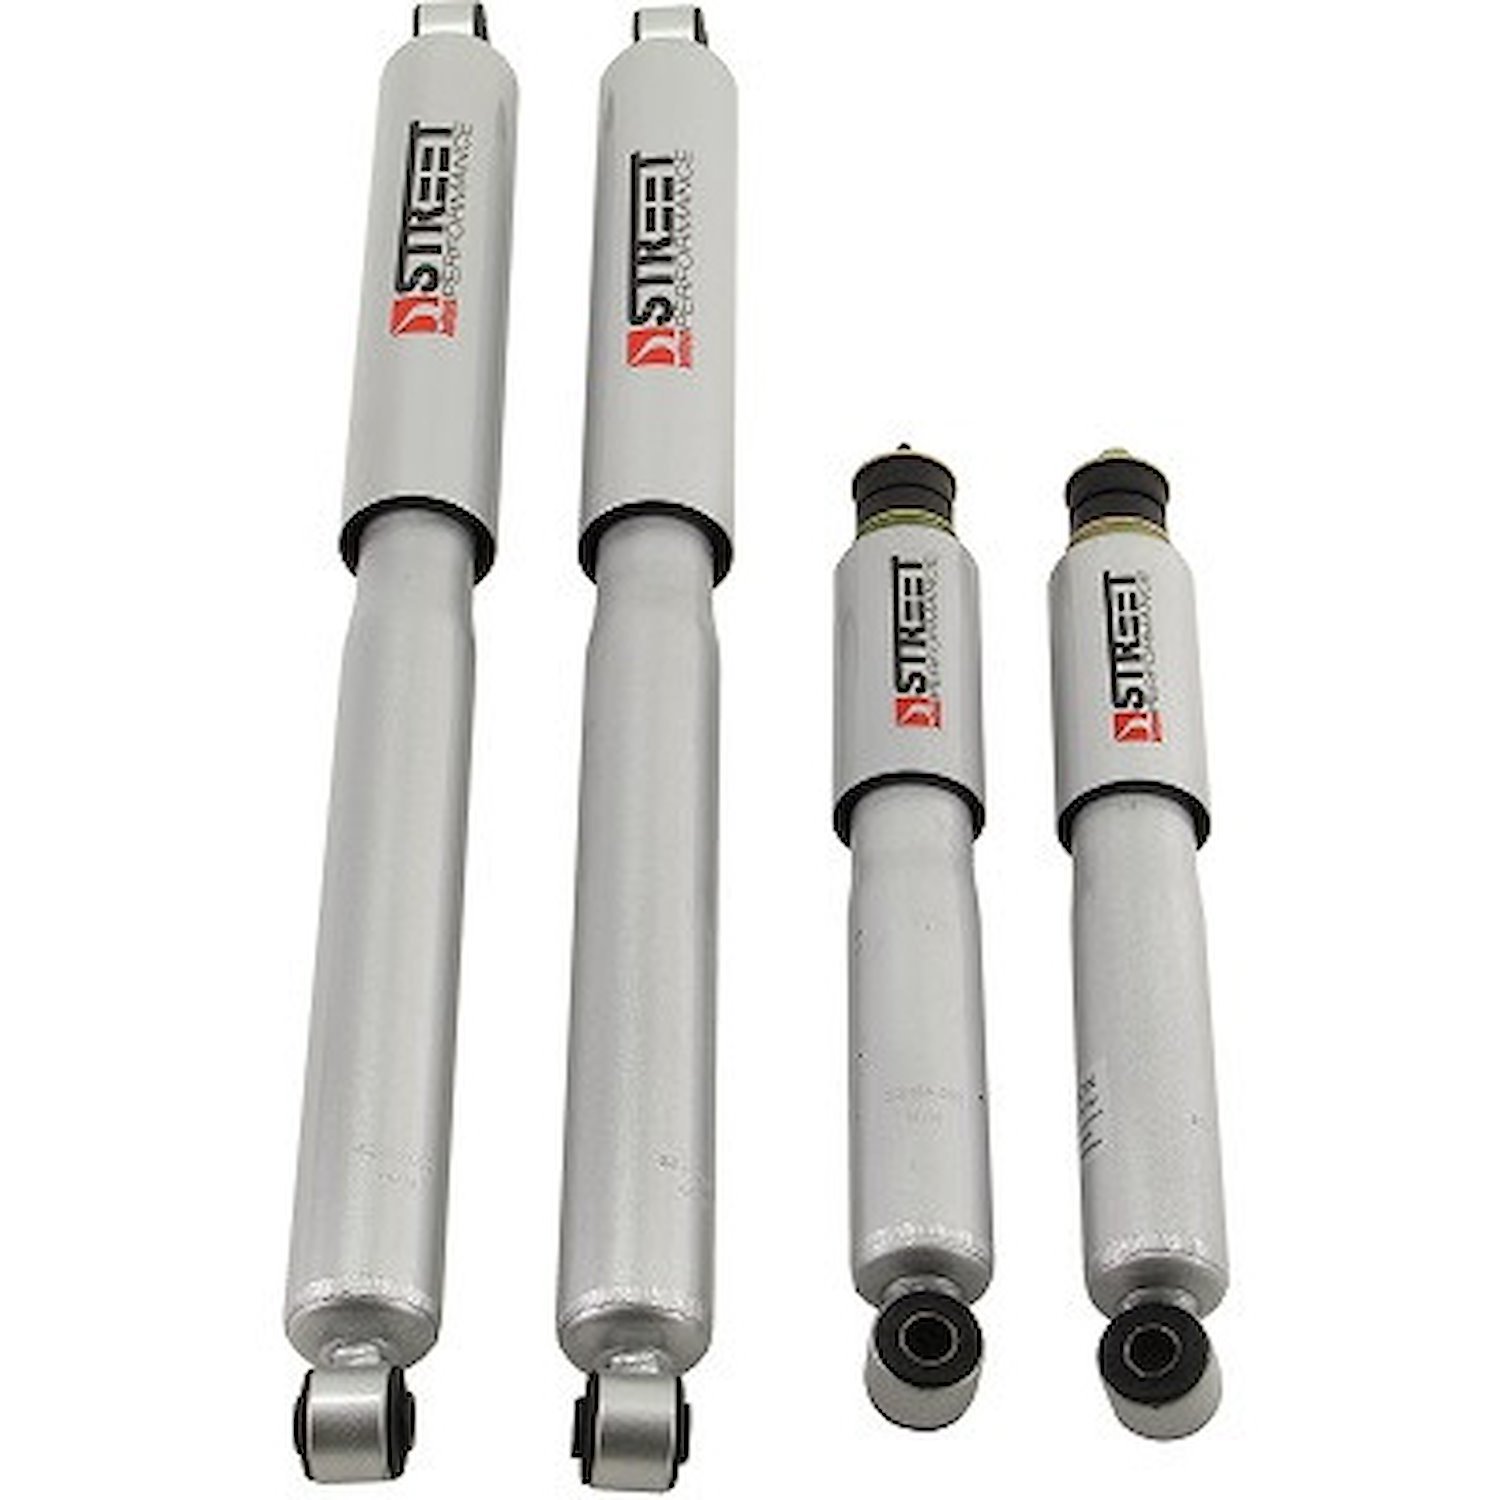 Street Performance OEM Shock Set for 1999-2004 Ford F-250/F-350 2WD